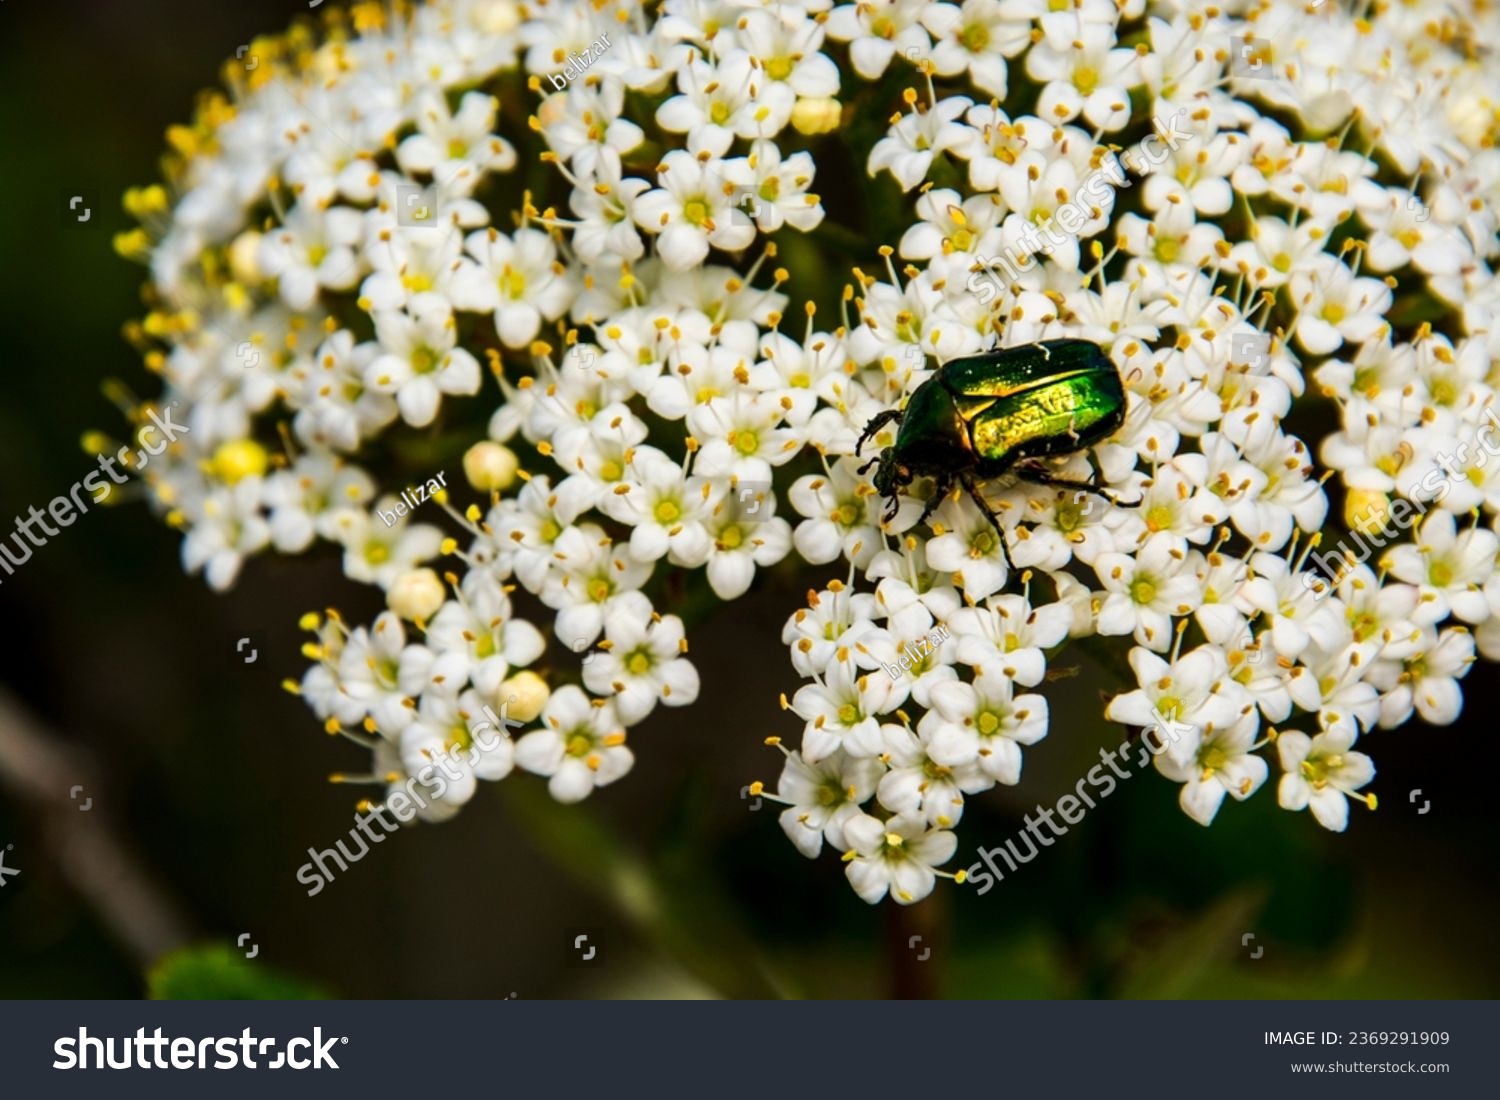 Wayfaring tree flowers, its scientific name is Viburnum lantana and rose chafer, its scientific name is Cetonia aurata #2369291909